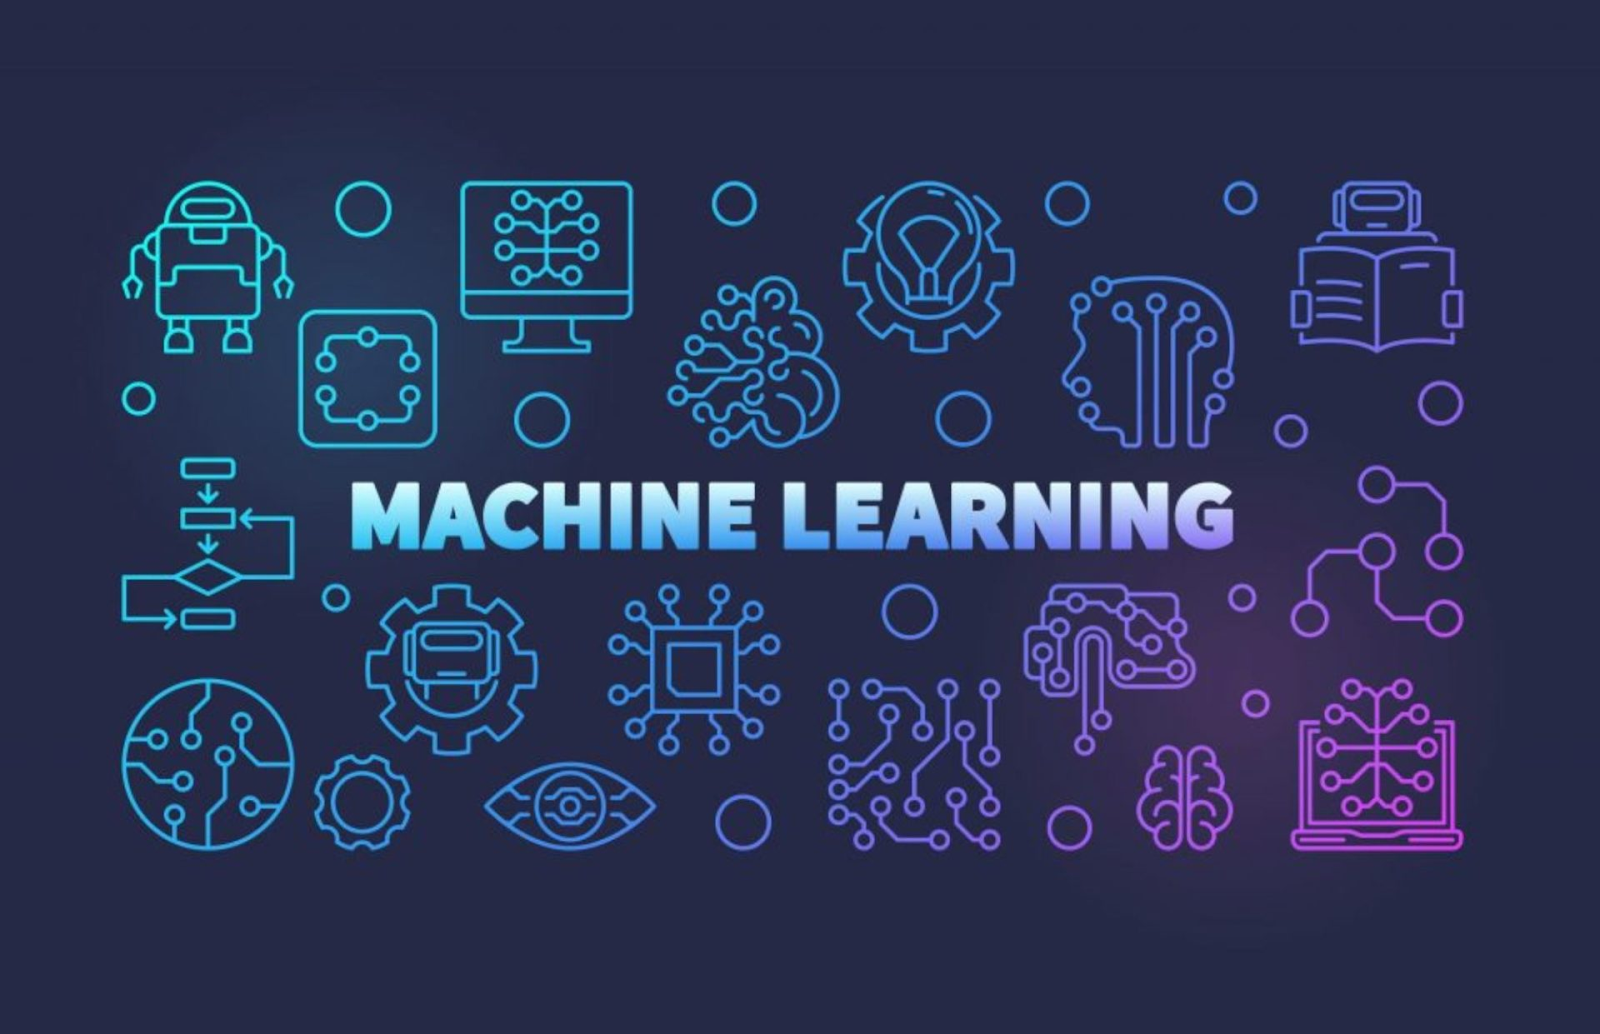 Classification in Machine Learning: A Guide for Beginners